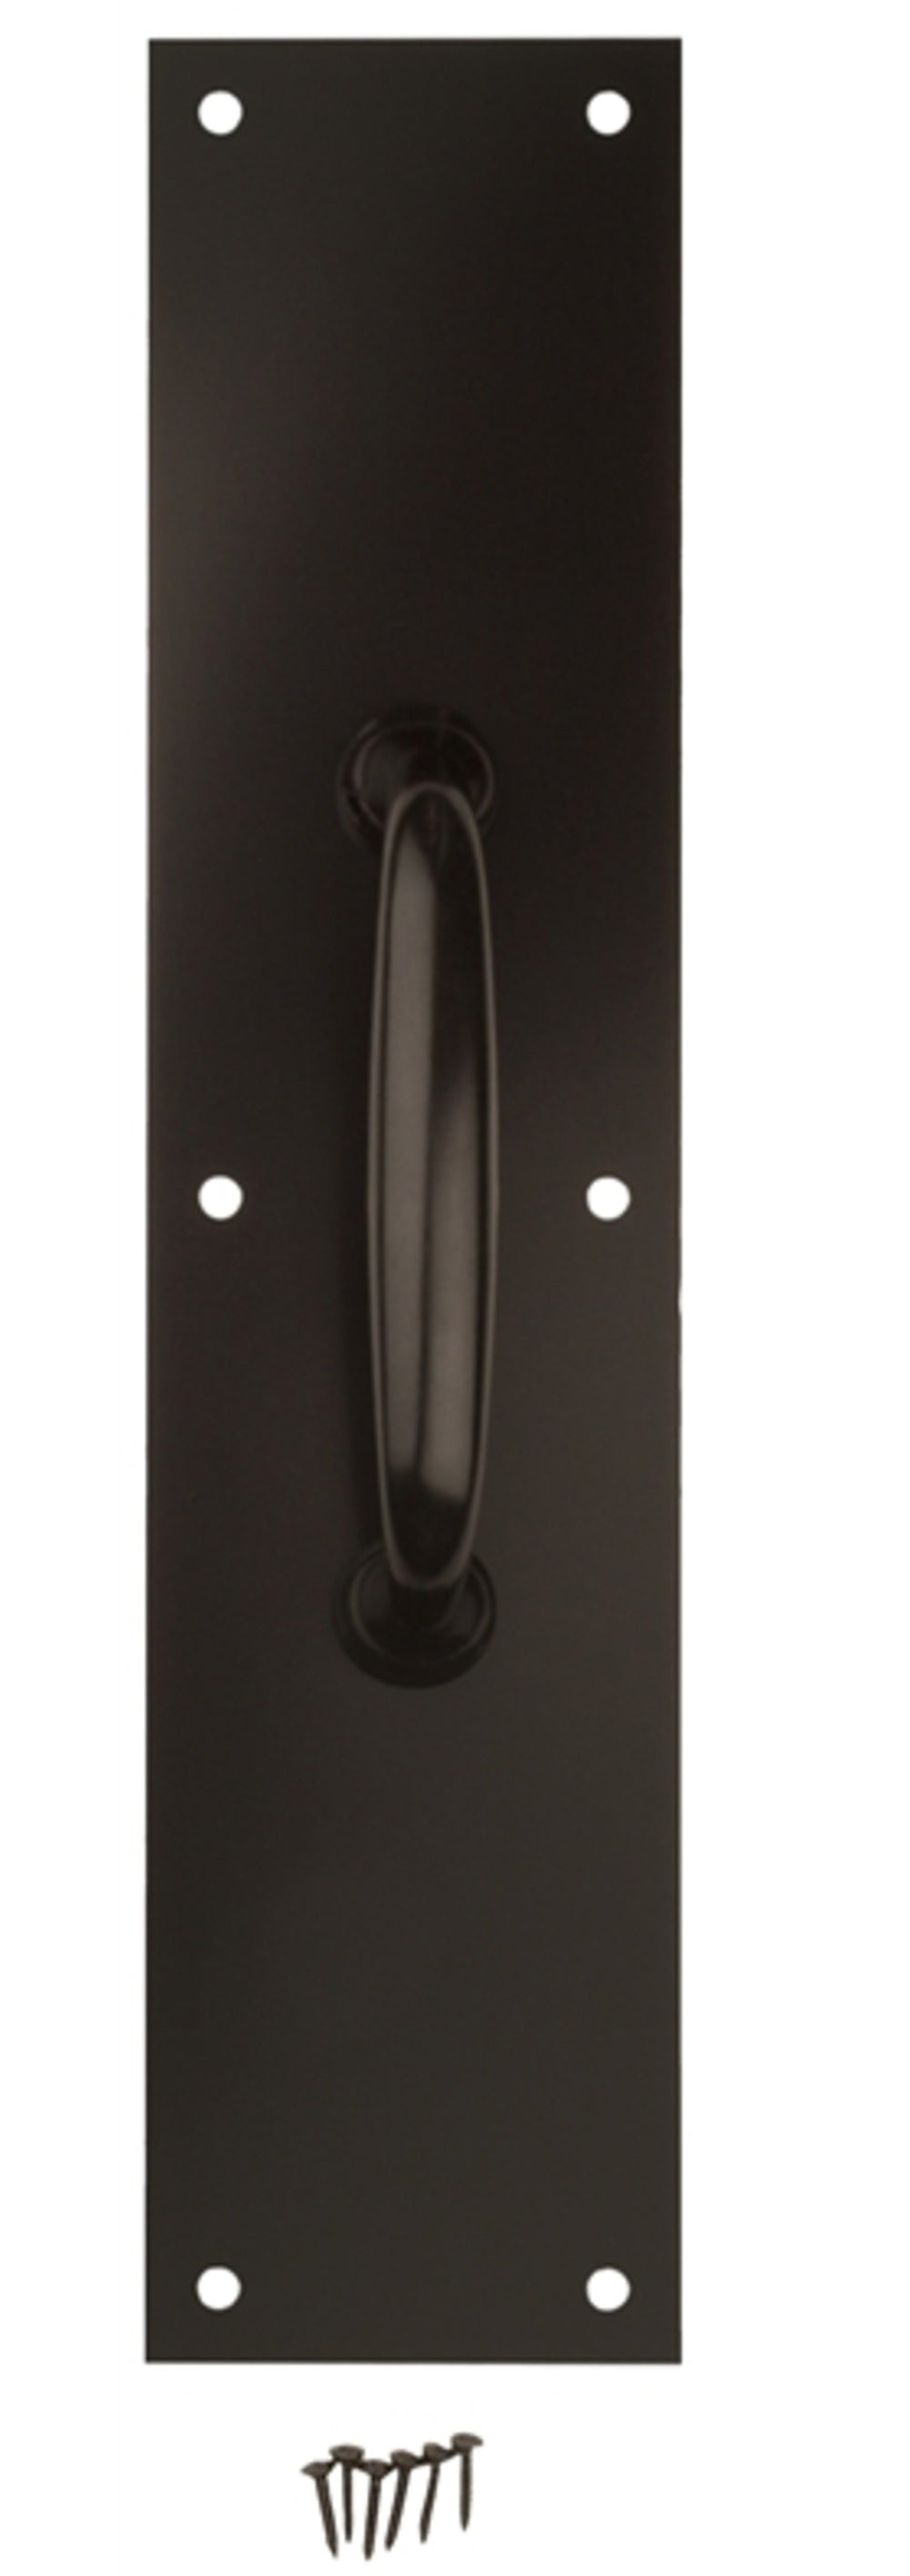 National Hardware N270-402 Pull Plate, Oil Rubbed Bronze